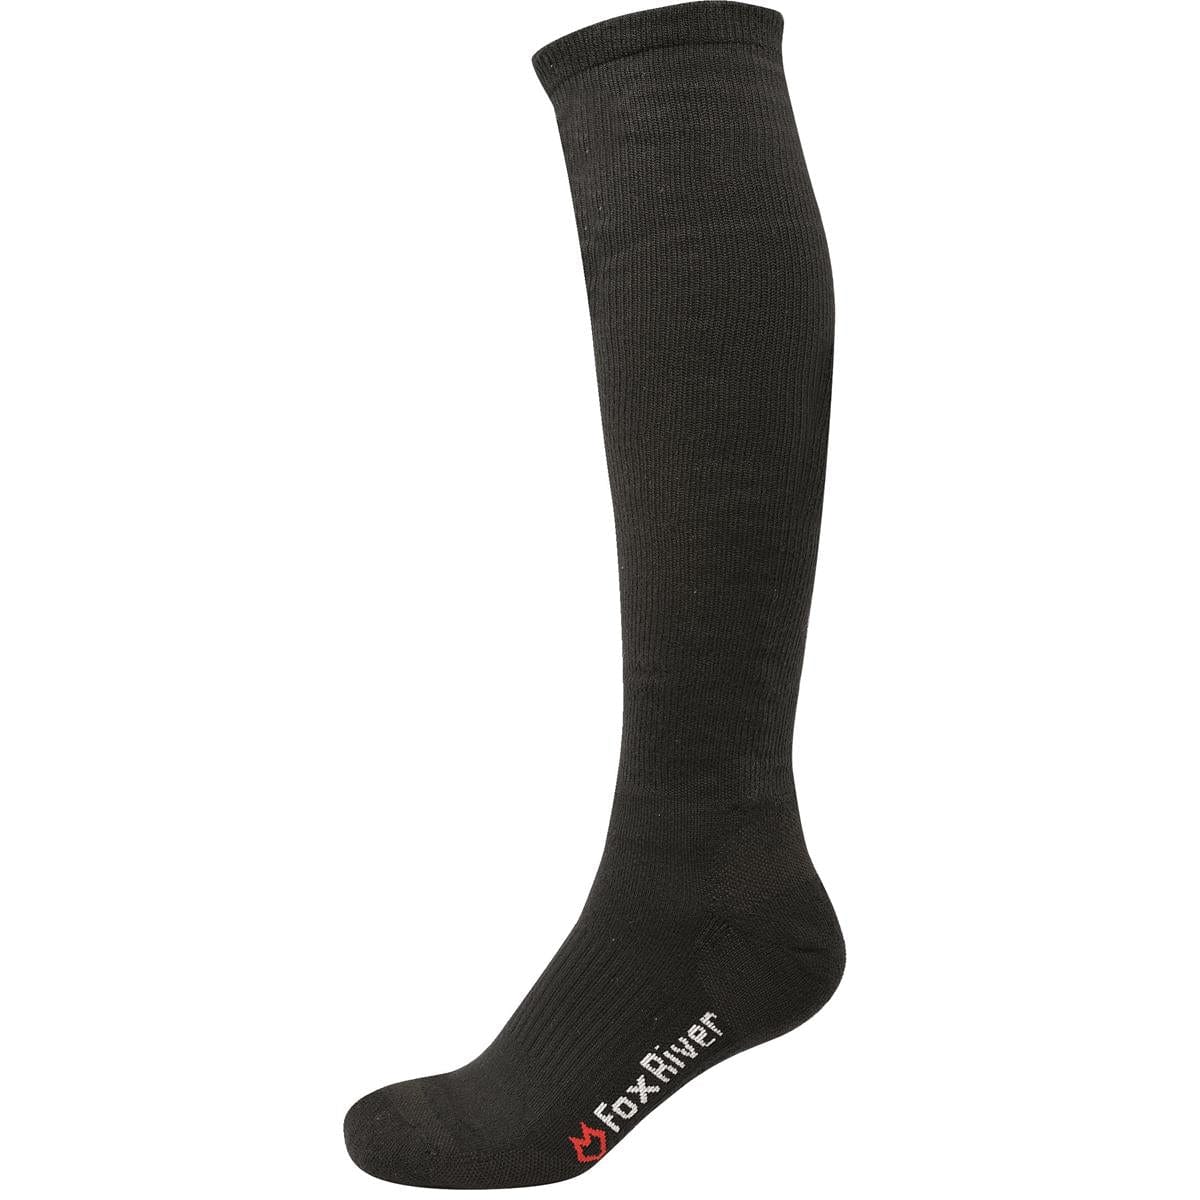 Fatigue-Fighting Over-the-Calf Socks, 1 Pair